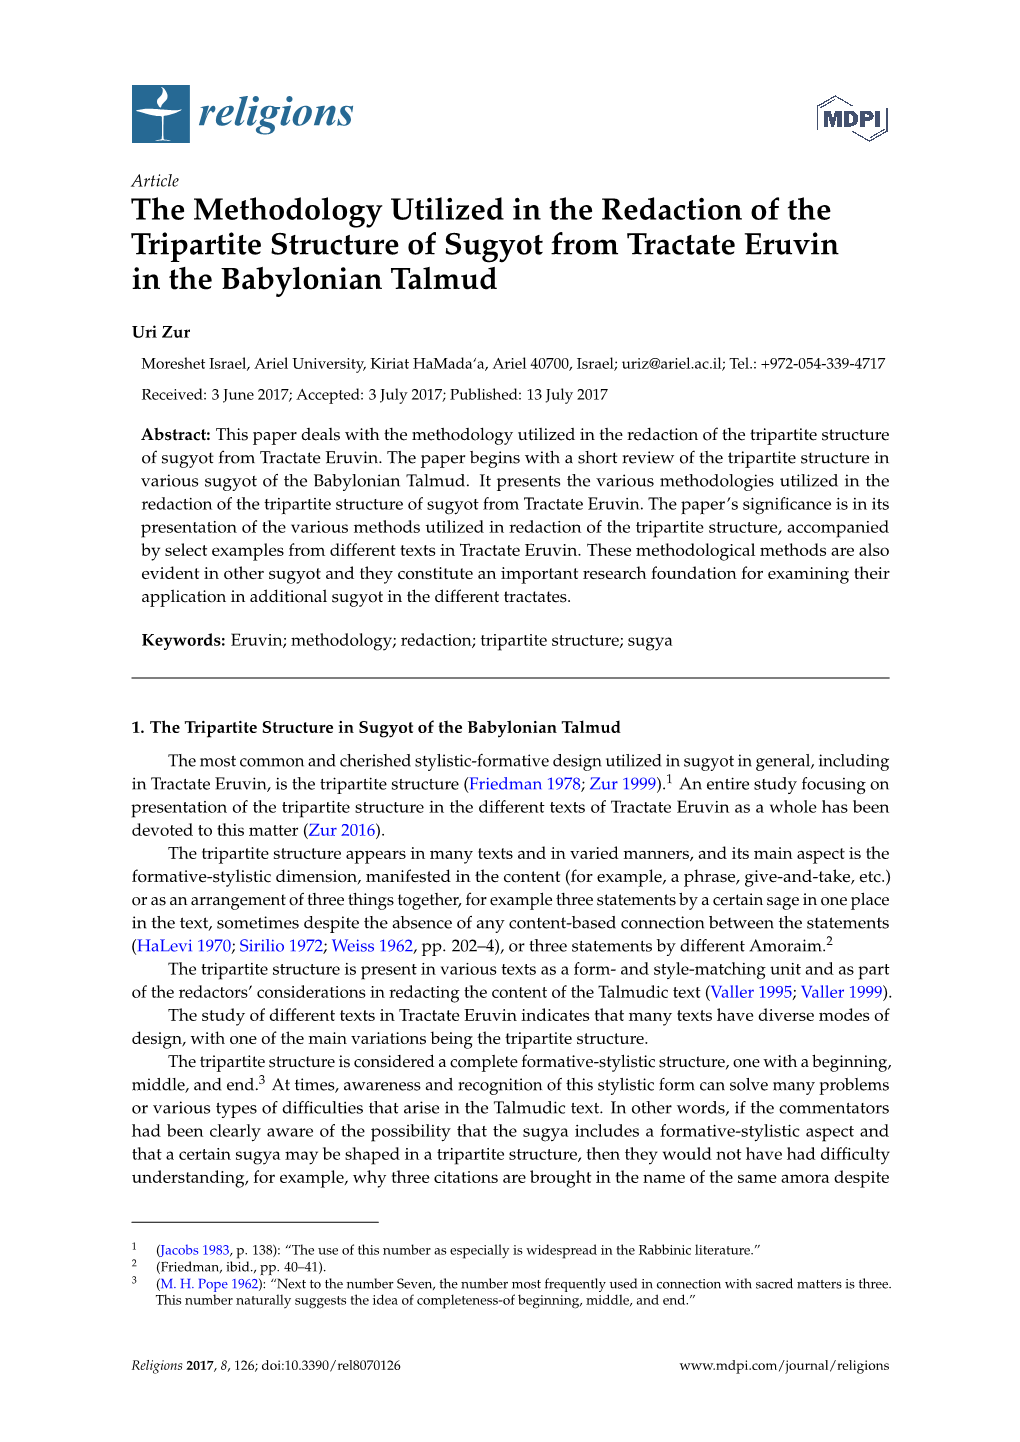 The Methodology Utilized in the Redaction of the Tripartite Structure of Sugyot from Tractate Eruvin in the Babylonian Talmud